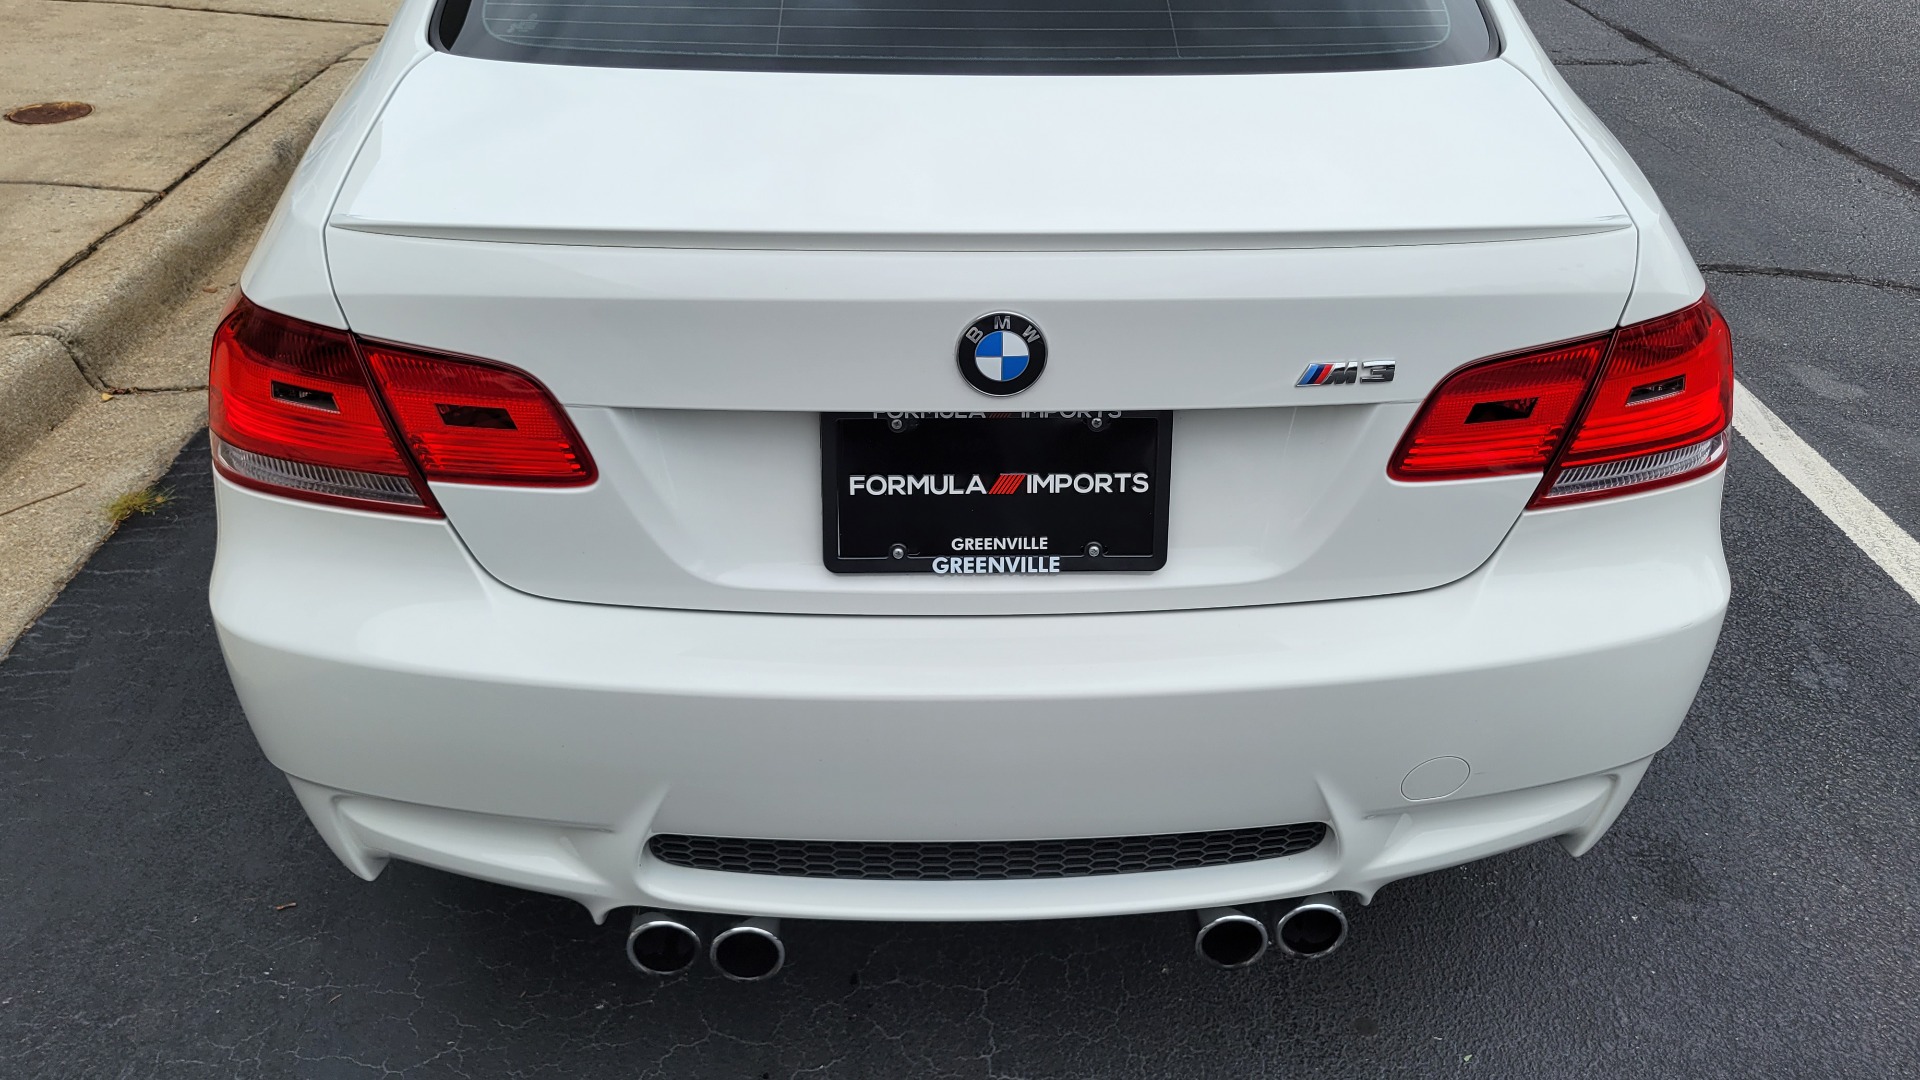 Used 2010 BMW M3 COUPE / MANUAL / 4.0L V8 / PREMIUM / TECHNOLOGY / SHADOWLINE for sale $54,995 at Formula Imports in Charlotte NC 28227 26